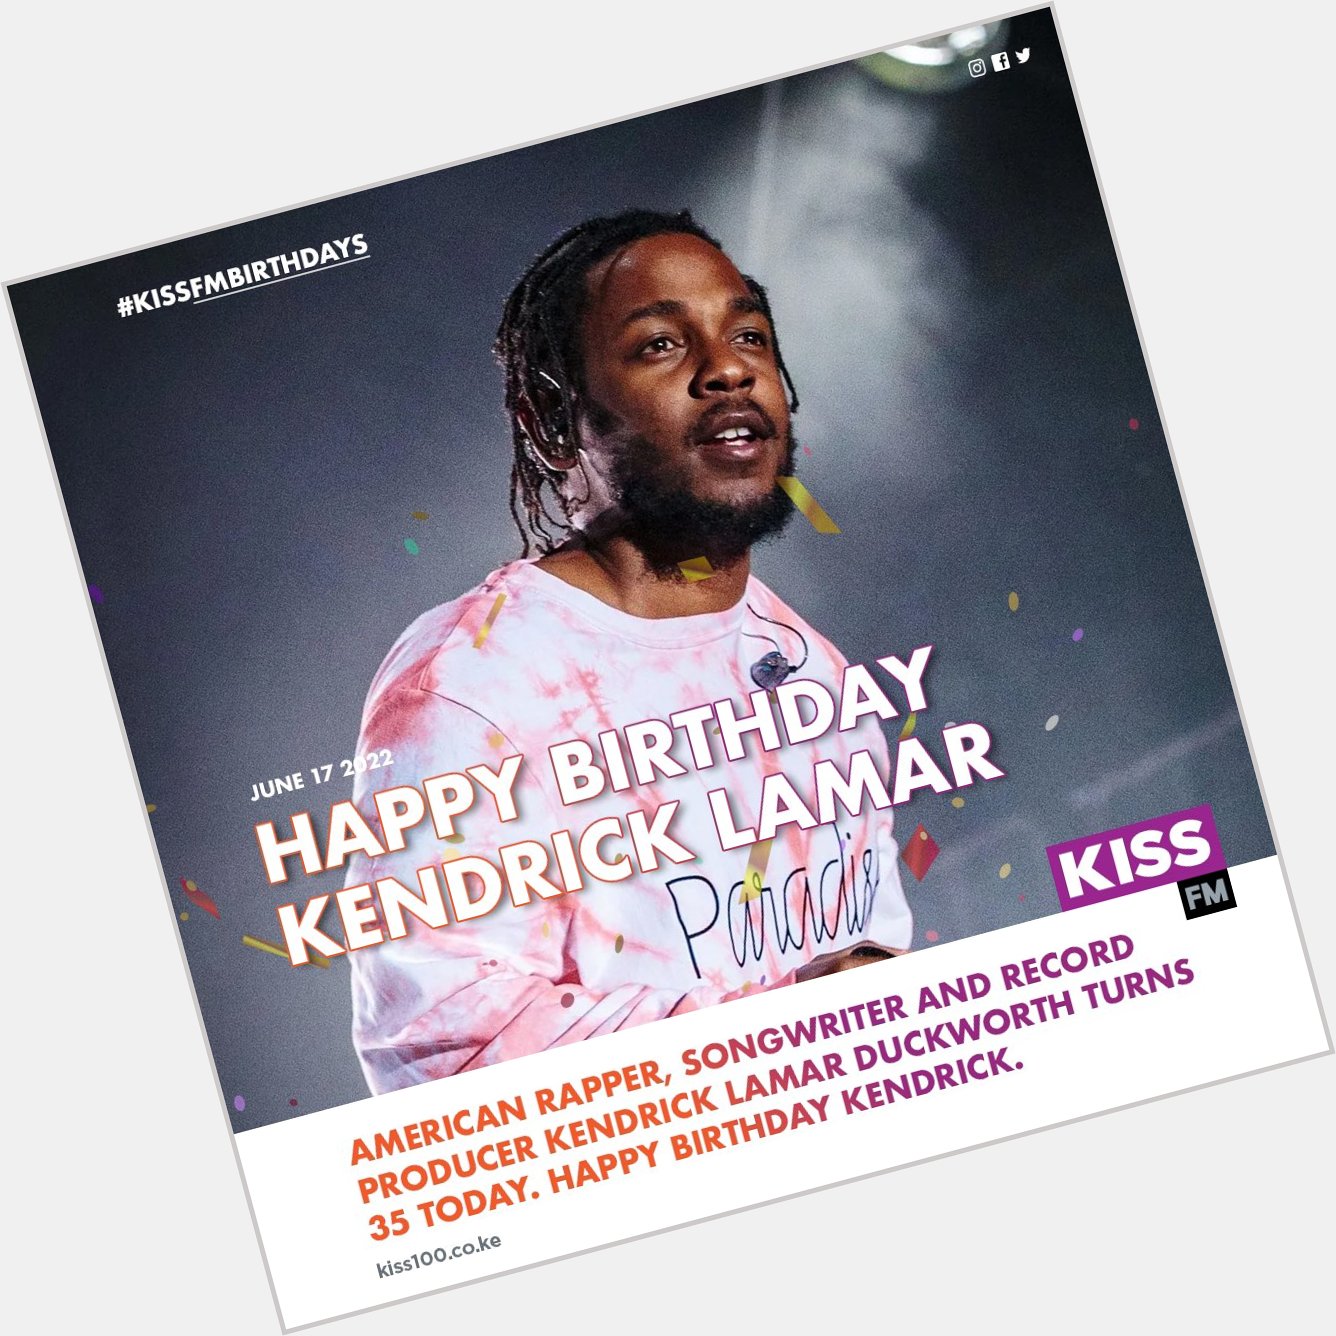 Kendrick Lamar turns 35 years old today. Happy Birthday to the legend.   